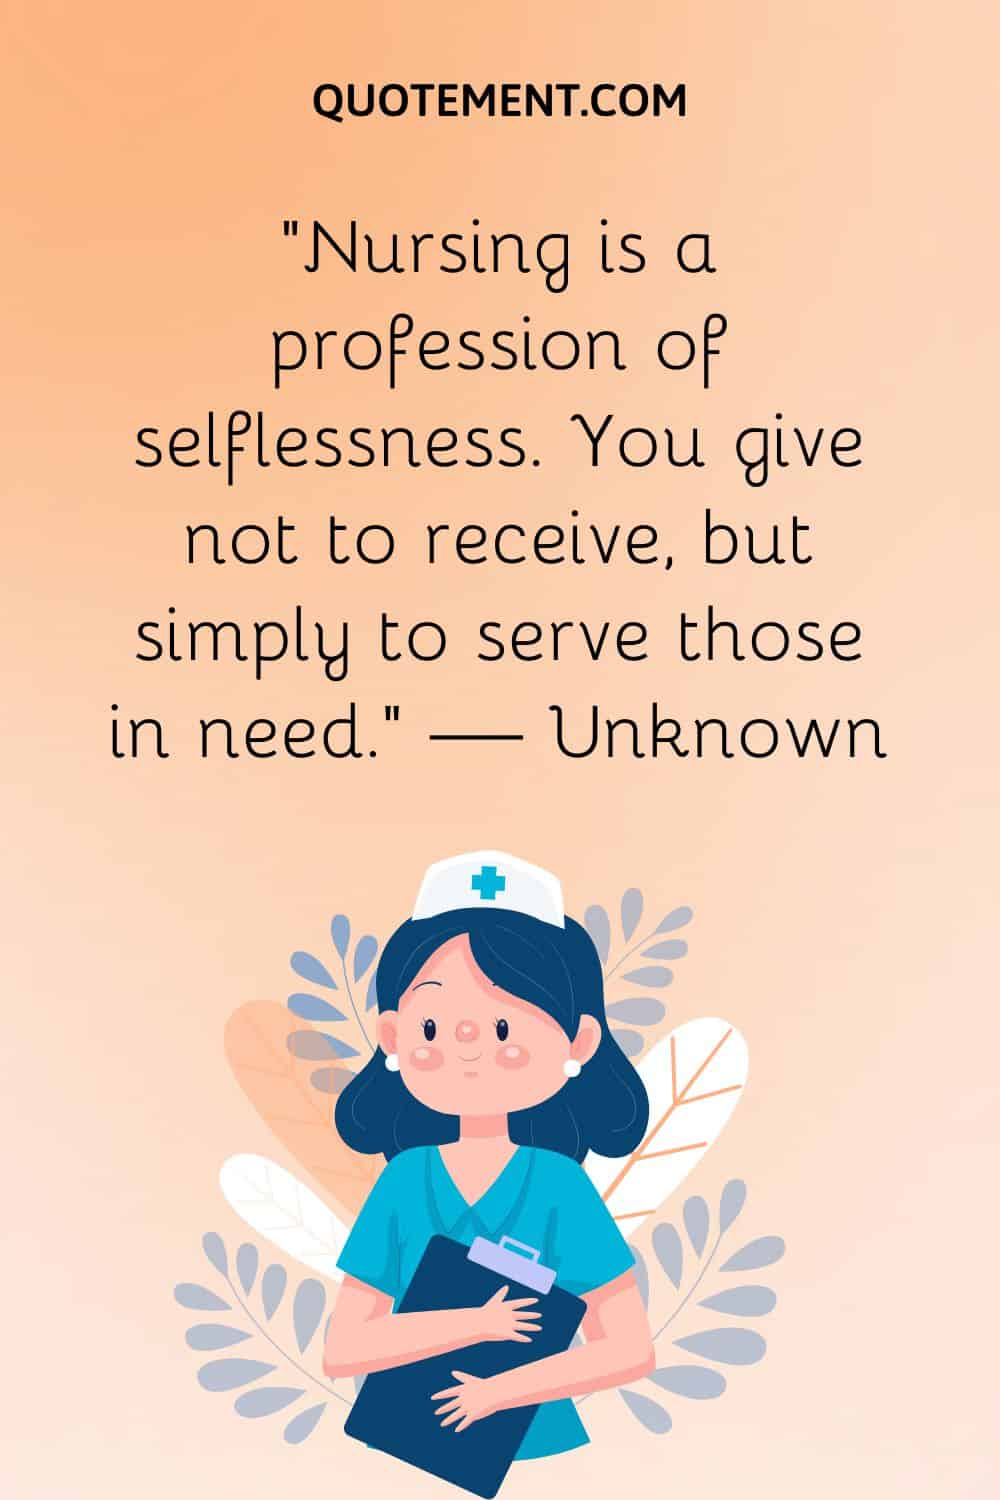 “Nursing is a profession of selflessness. You give not to receive, but simply to serve those in need.” — Unknown